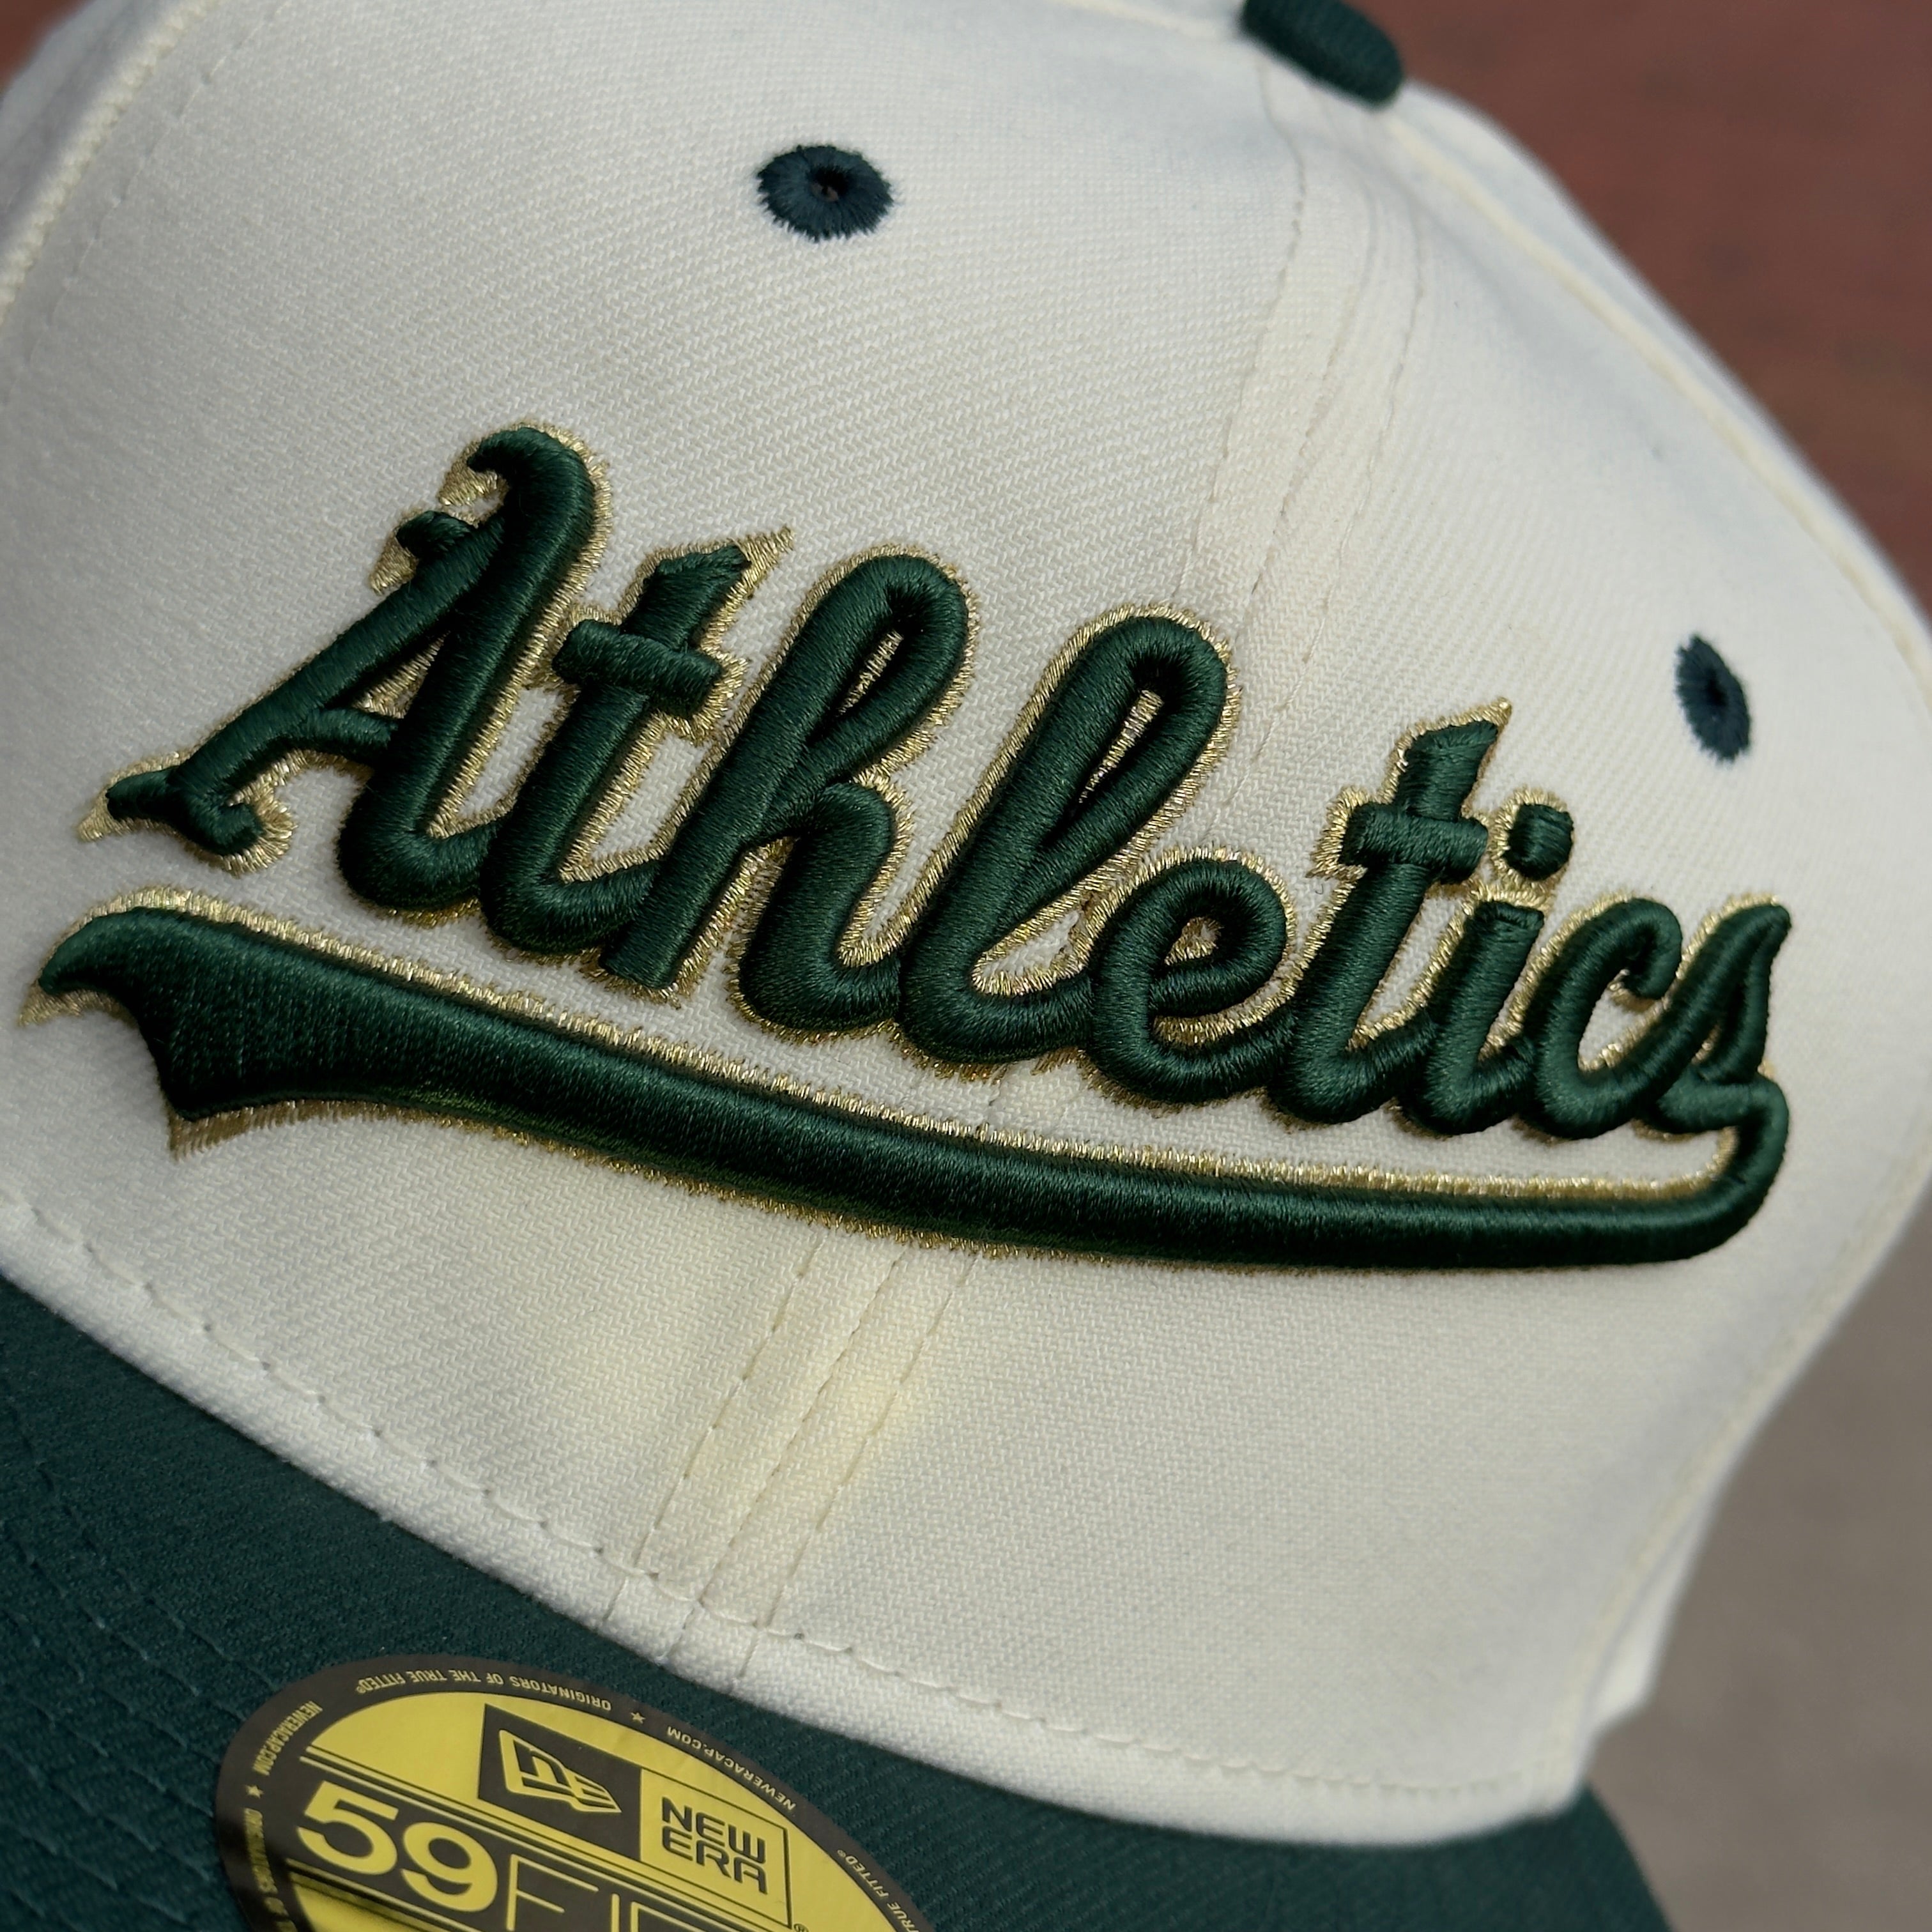 7 5/8 Chrome Oakland Athletics 50 Years 1968 2018 59fifty New Era Fitted Cap Hat